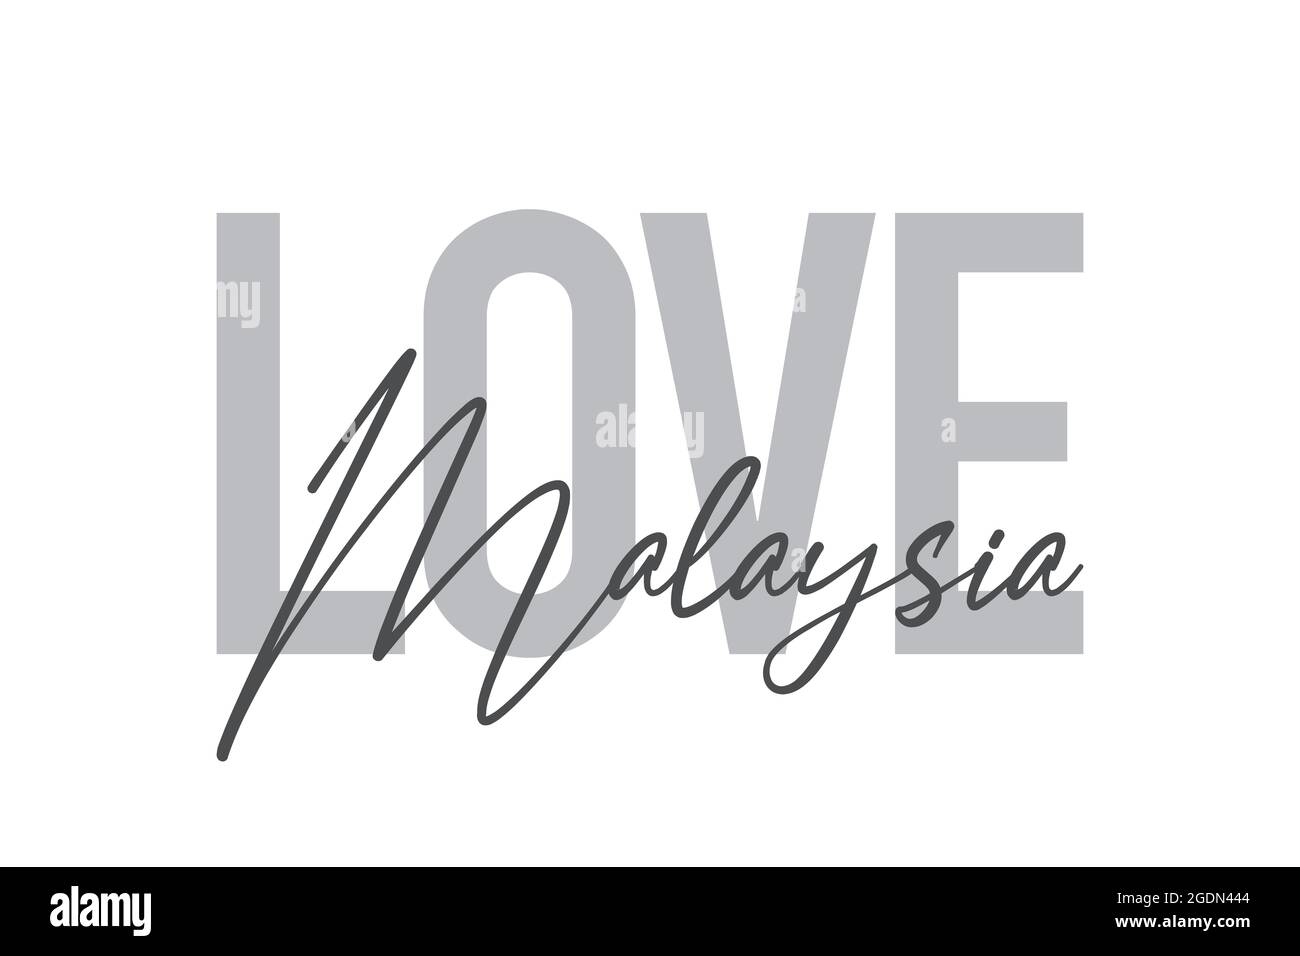 Modern, simple, minimal typographic design of a saying 'Love Malaysia' in tones of grey color. Cool, urban, trendy and playful graphic vector art with Stock Photo